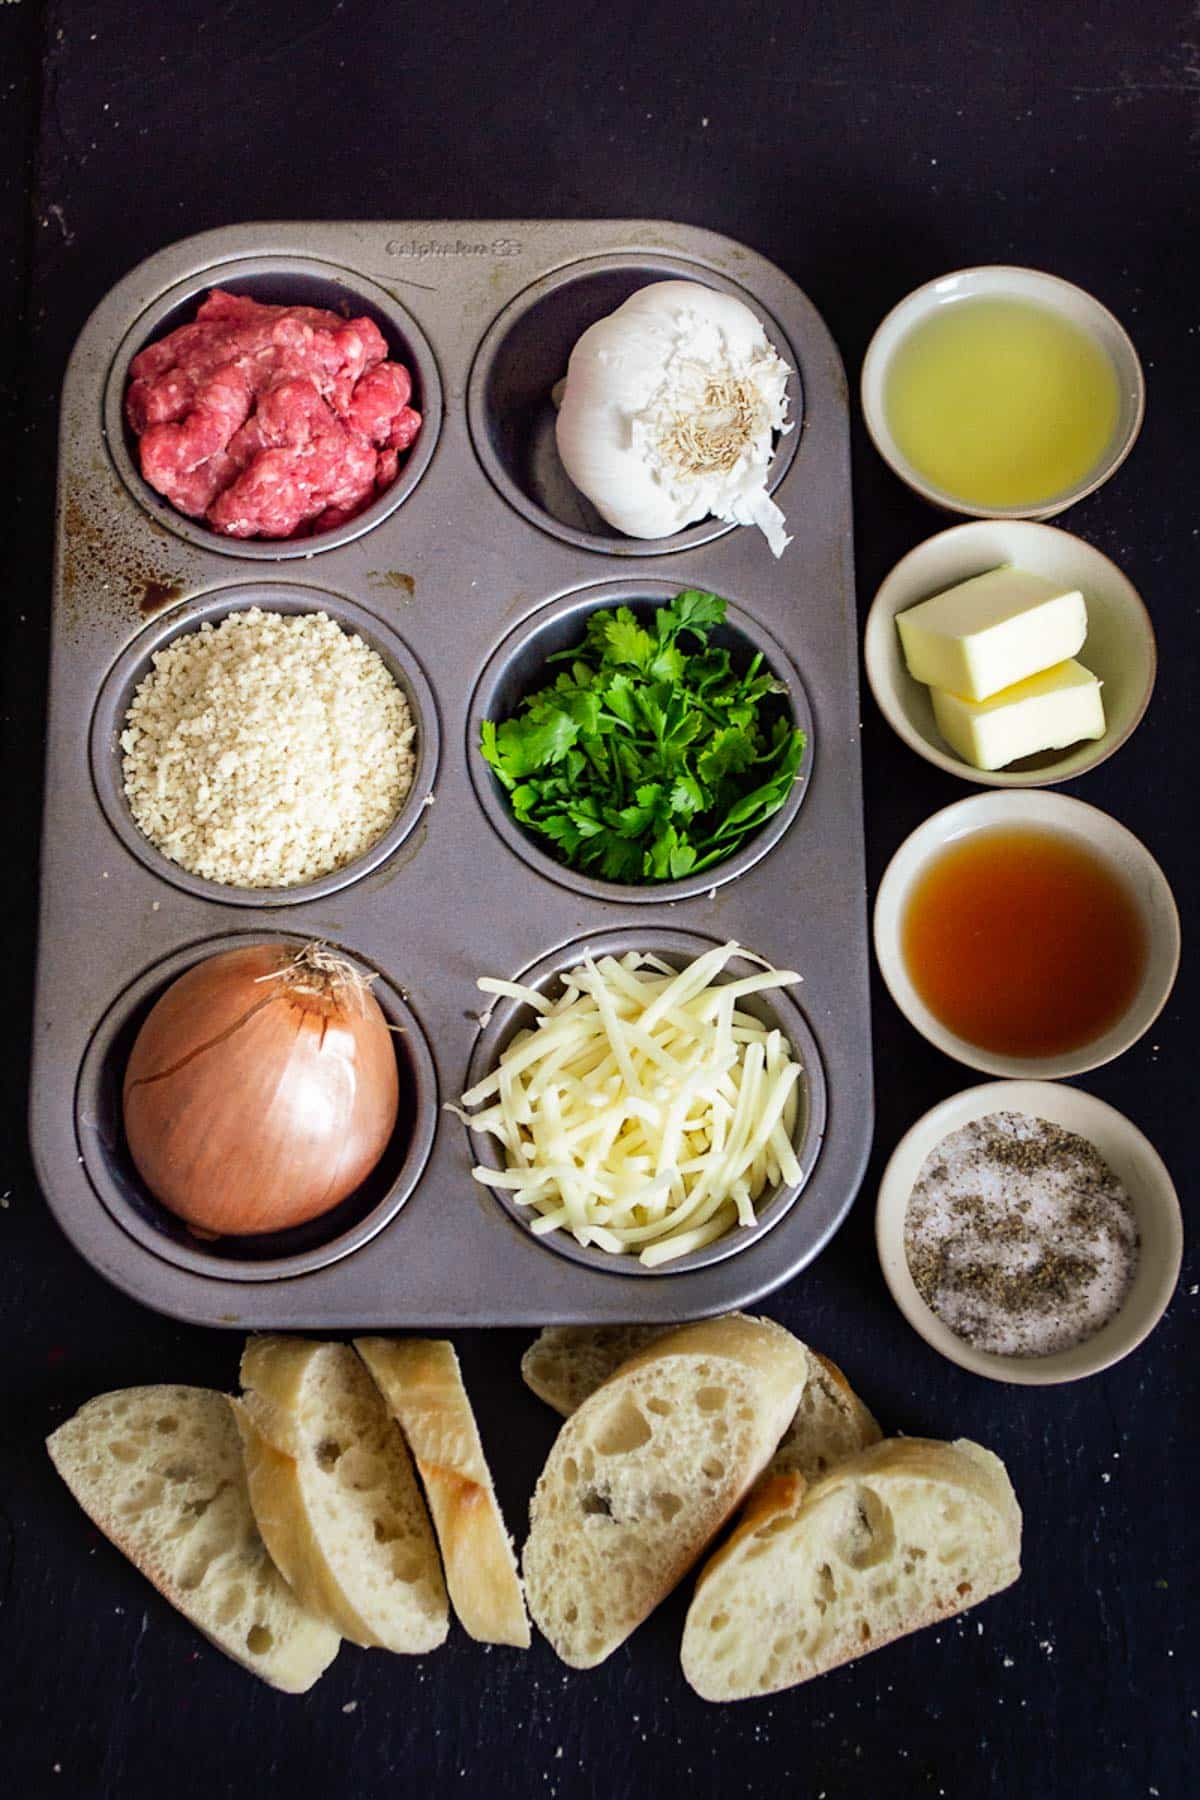 The ingredients for French Onion Meatballs.